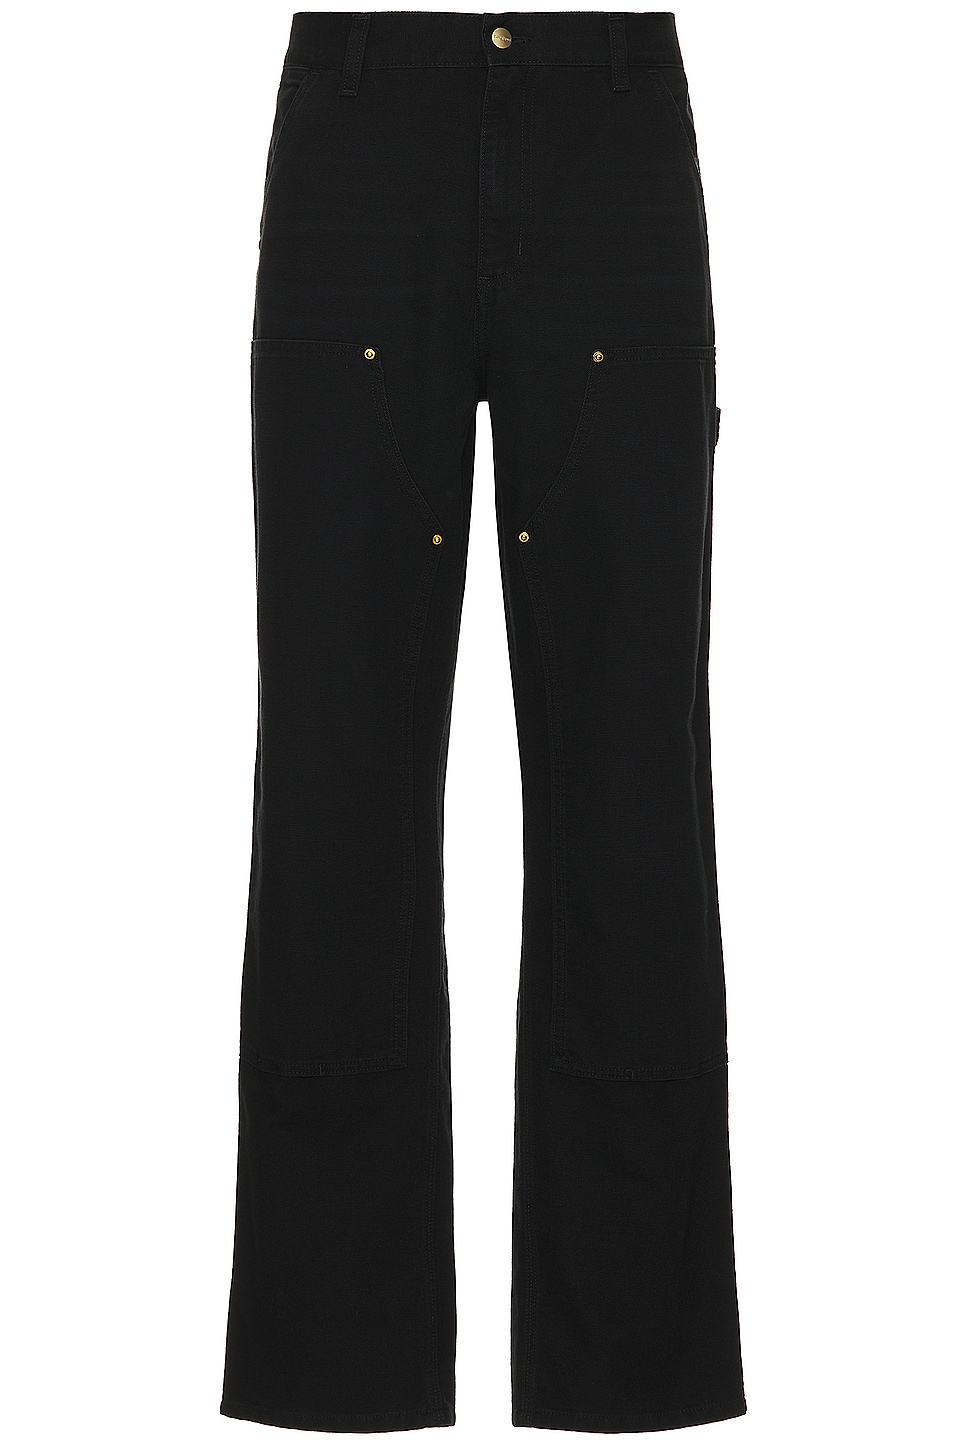 Image 1 of Carhartt WIP Double Knee Pant in Black Aged Canvas